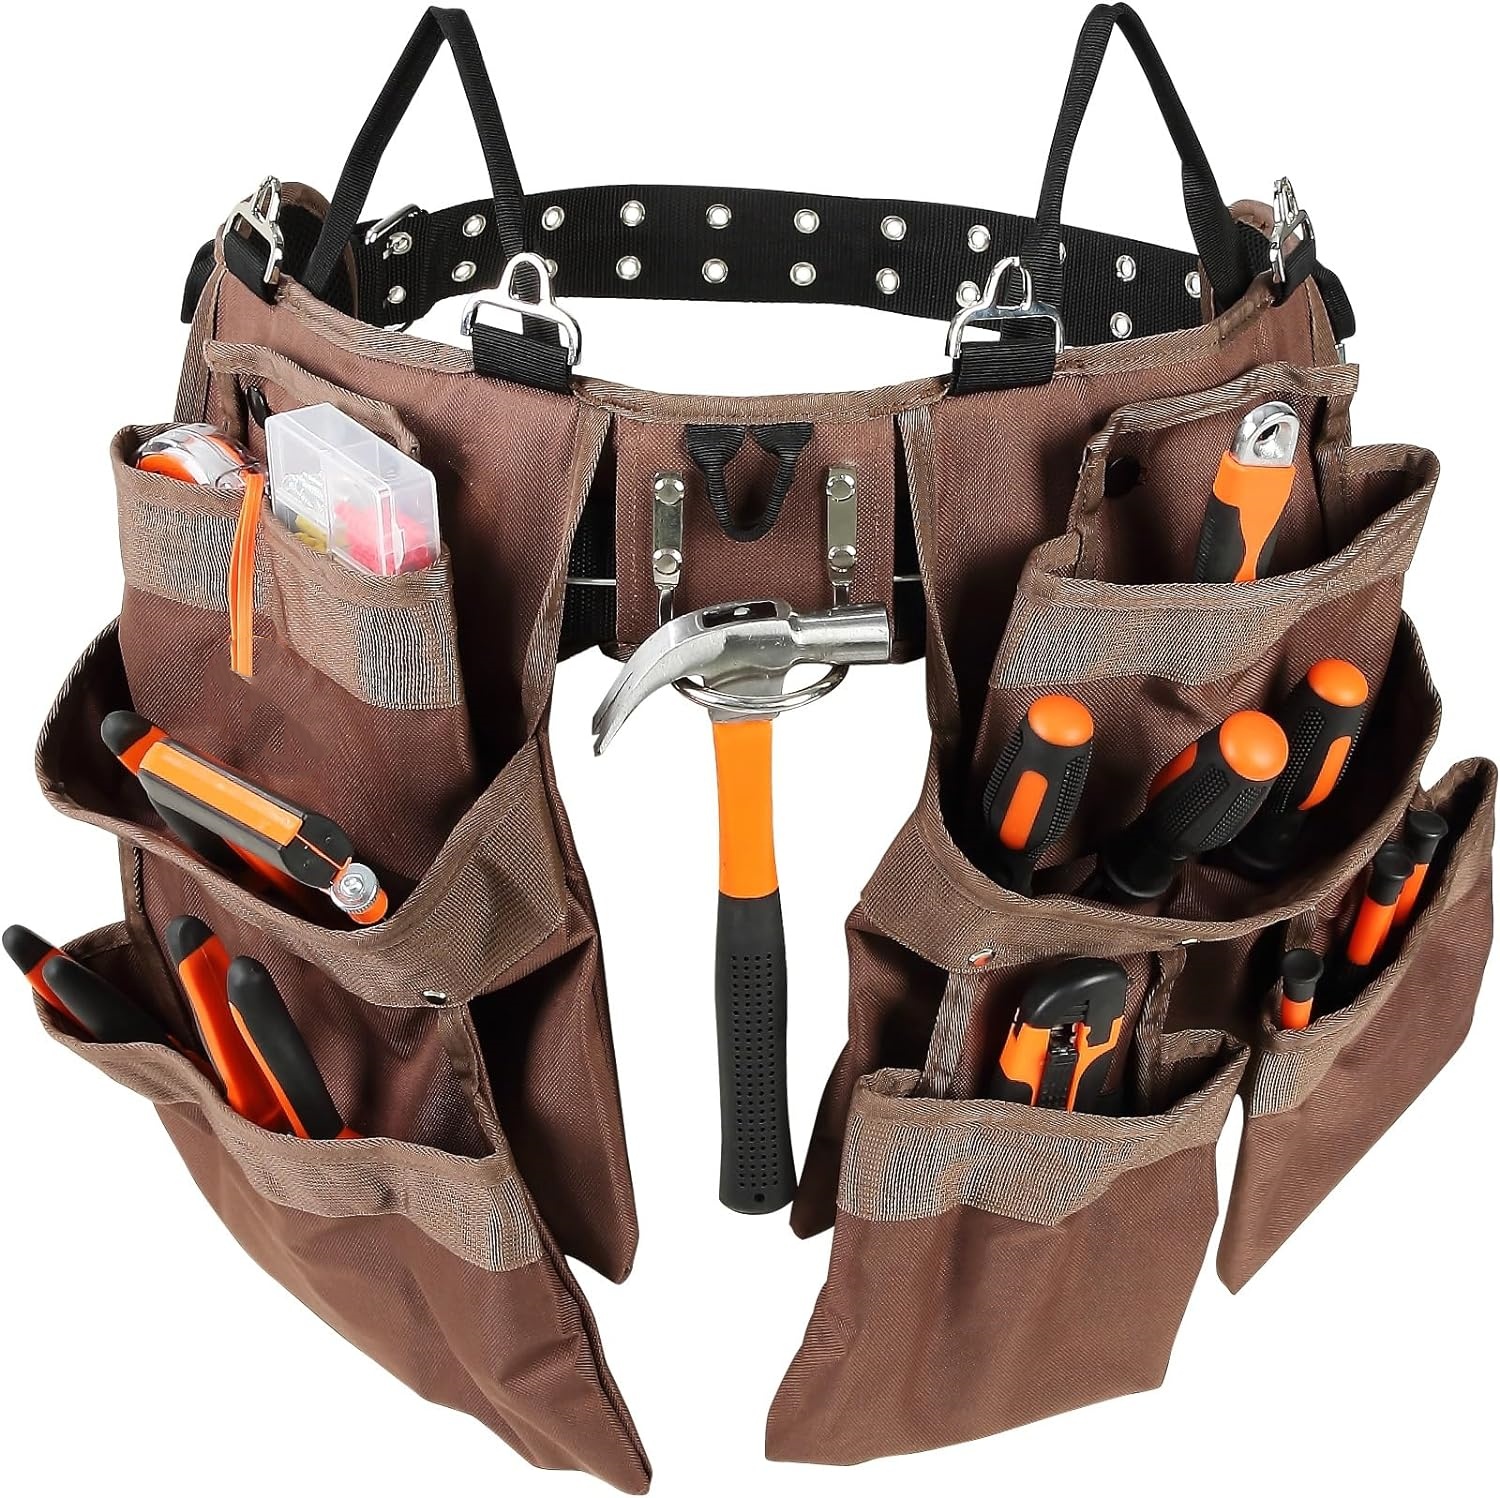 19 Pockets, Adjusts from 32 Inches to 54 Inches, Polyester Heavy Duty Tool Pouch Bag, Detachable Tool Bag